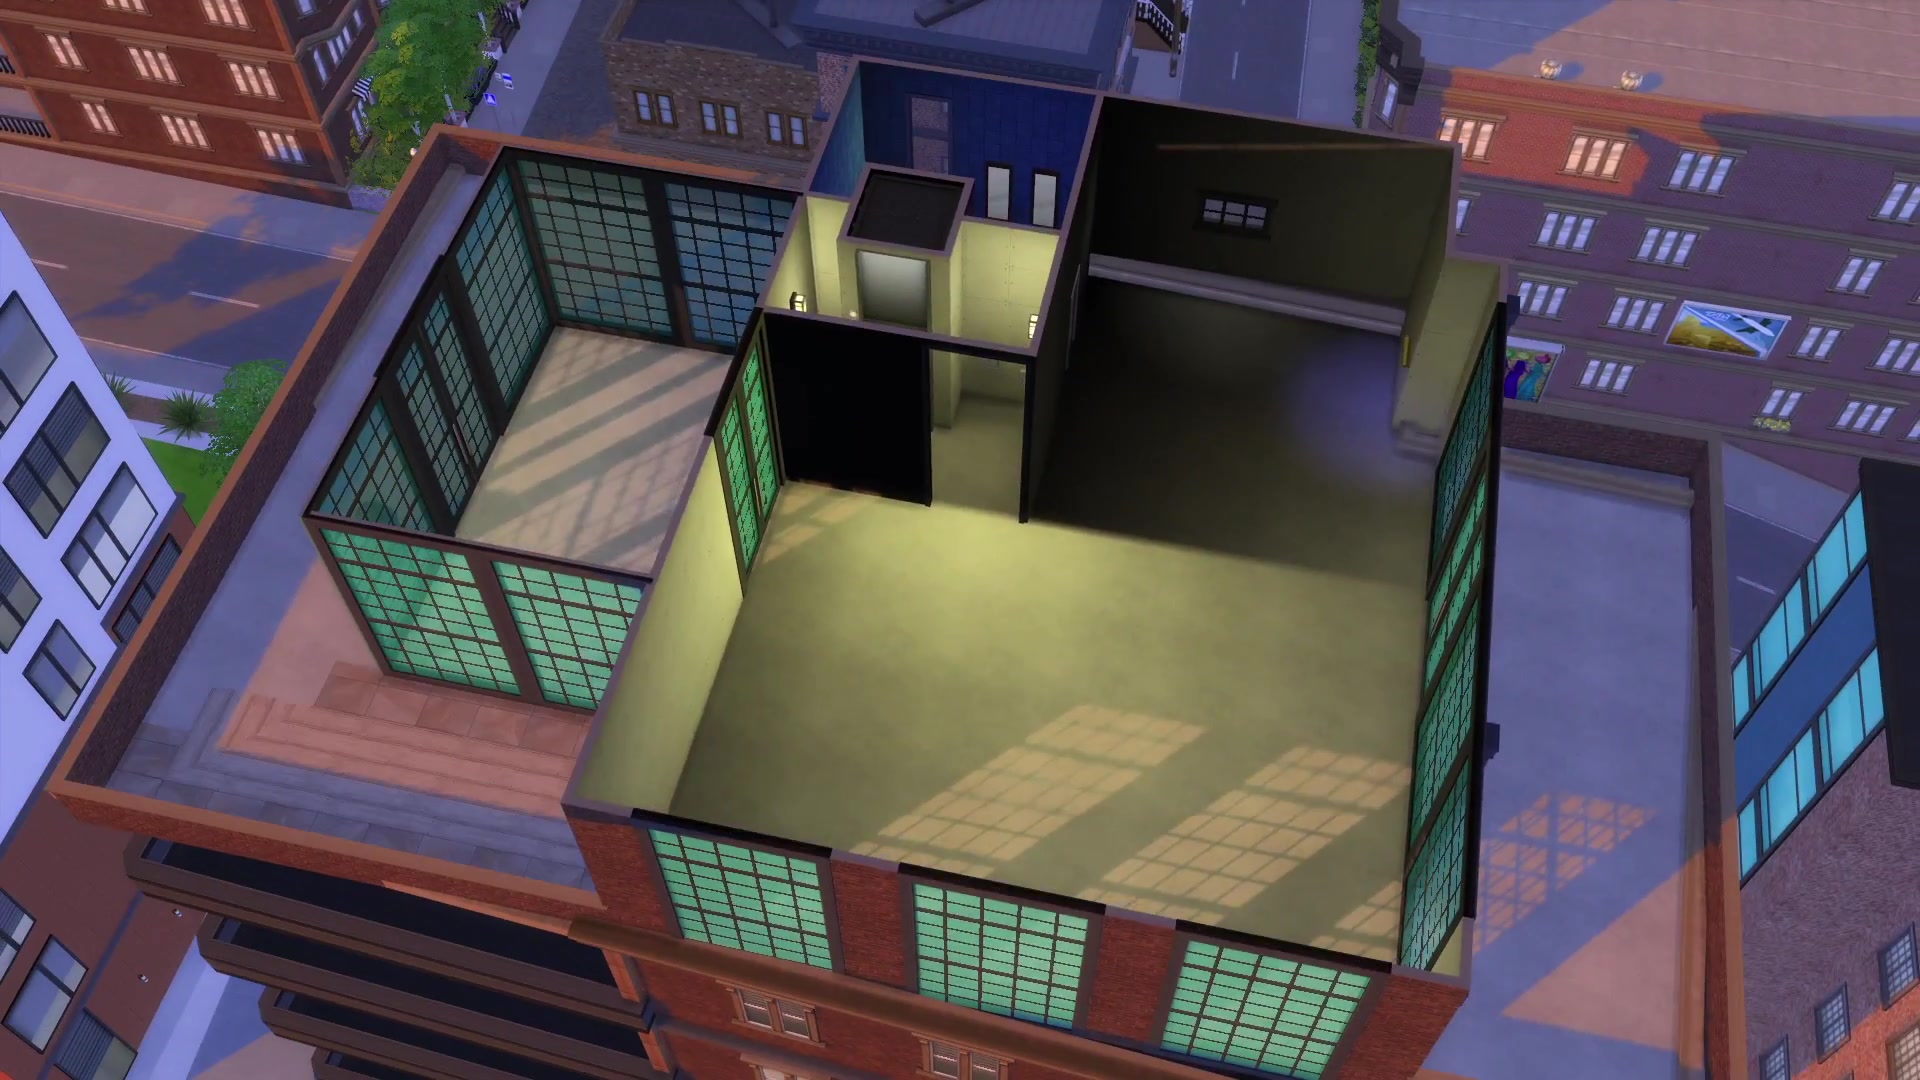 sims 4 city living free download windows 10